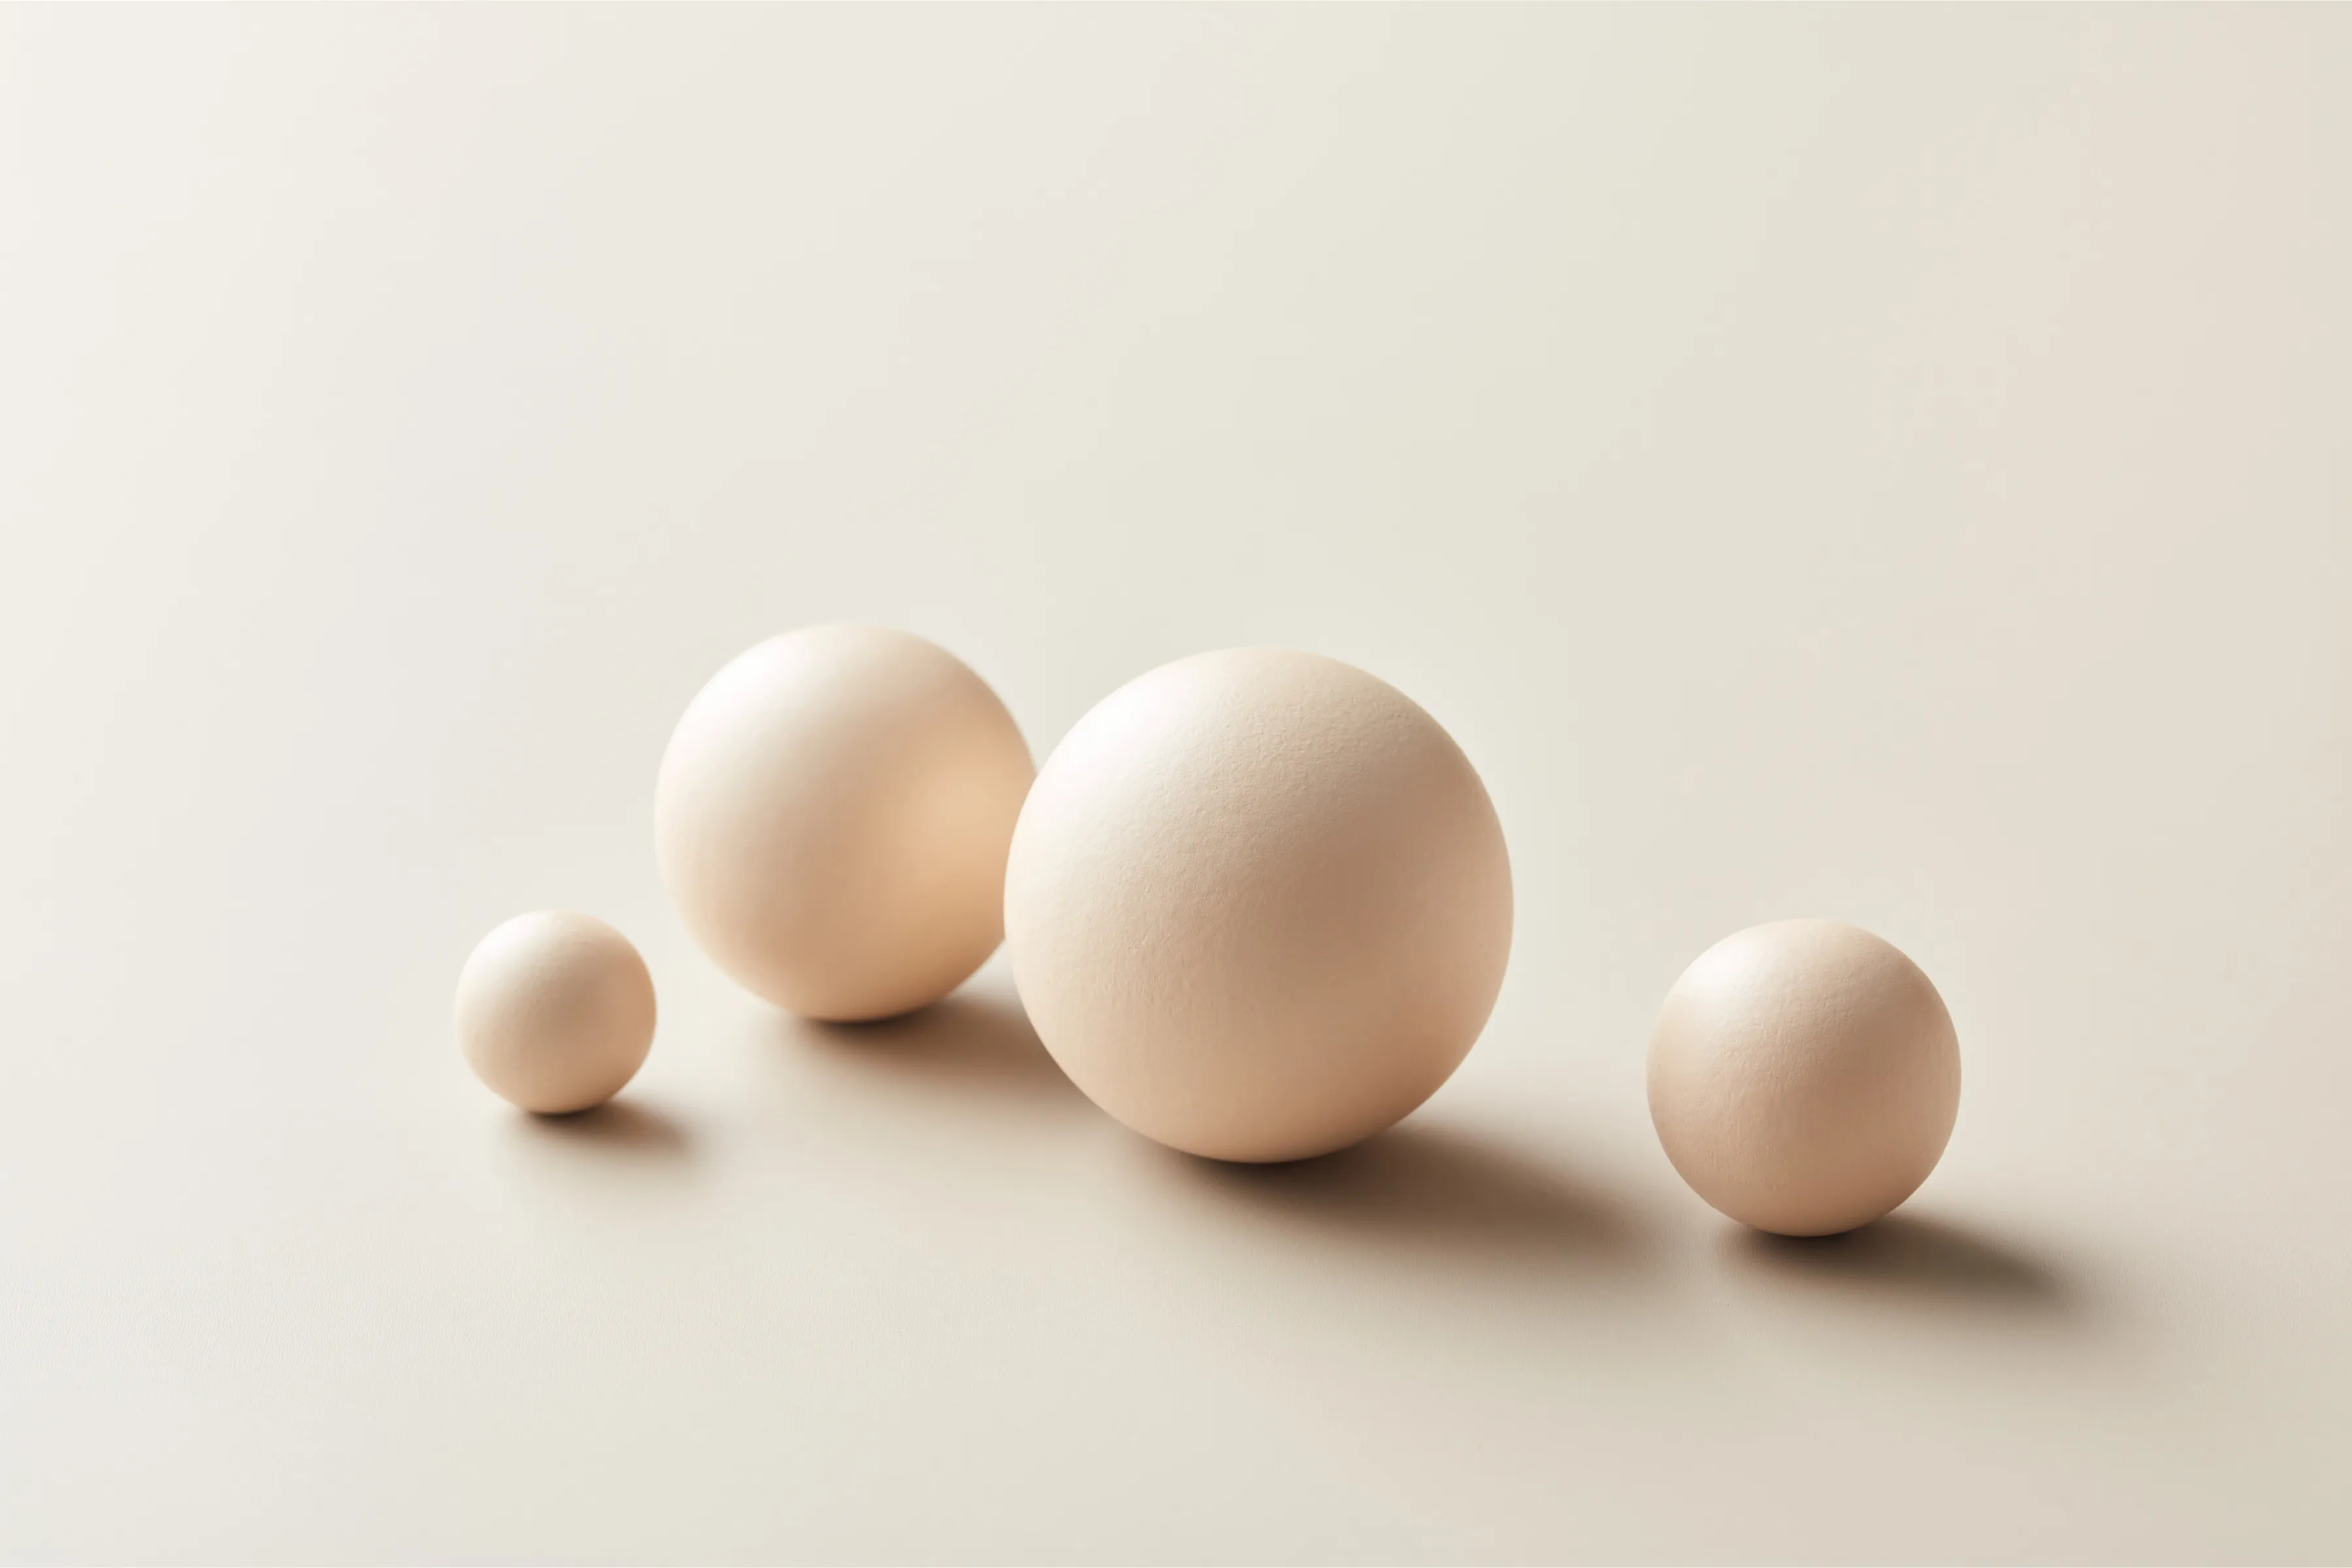 Four spheres of varying sizes aligned diagonally on a beige background with soft shadows.